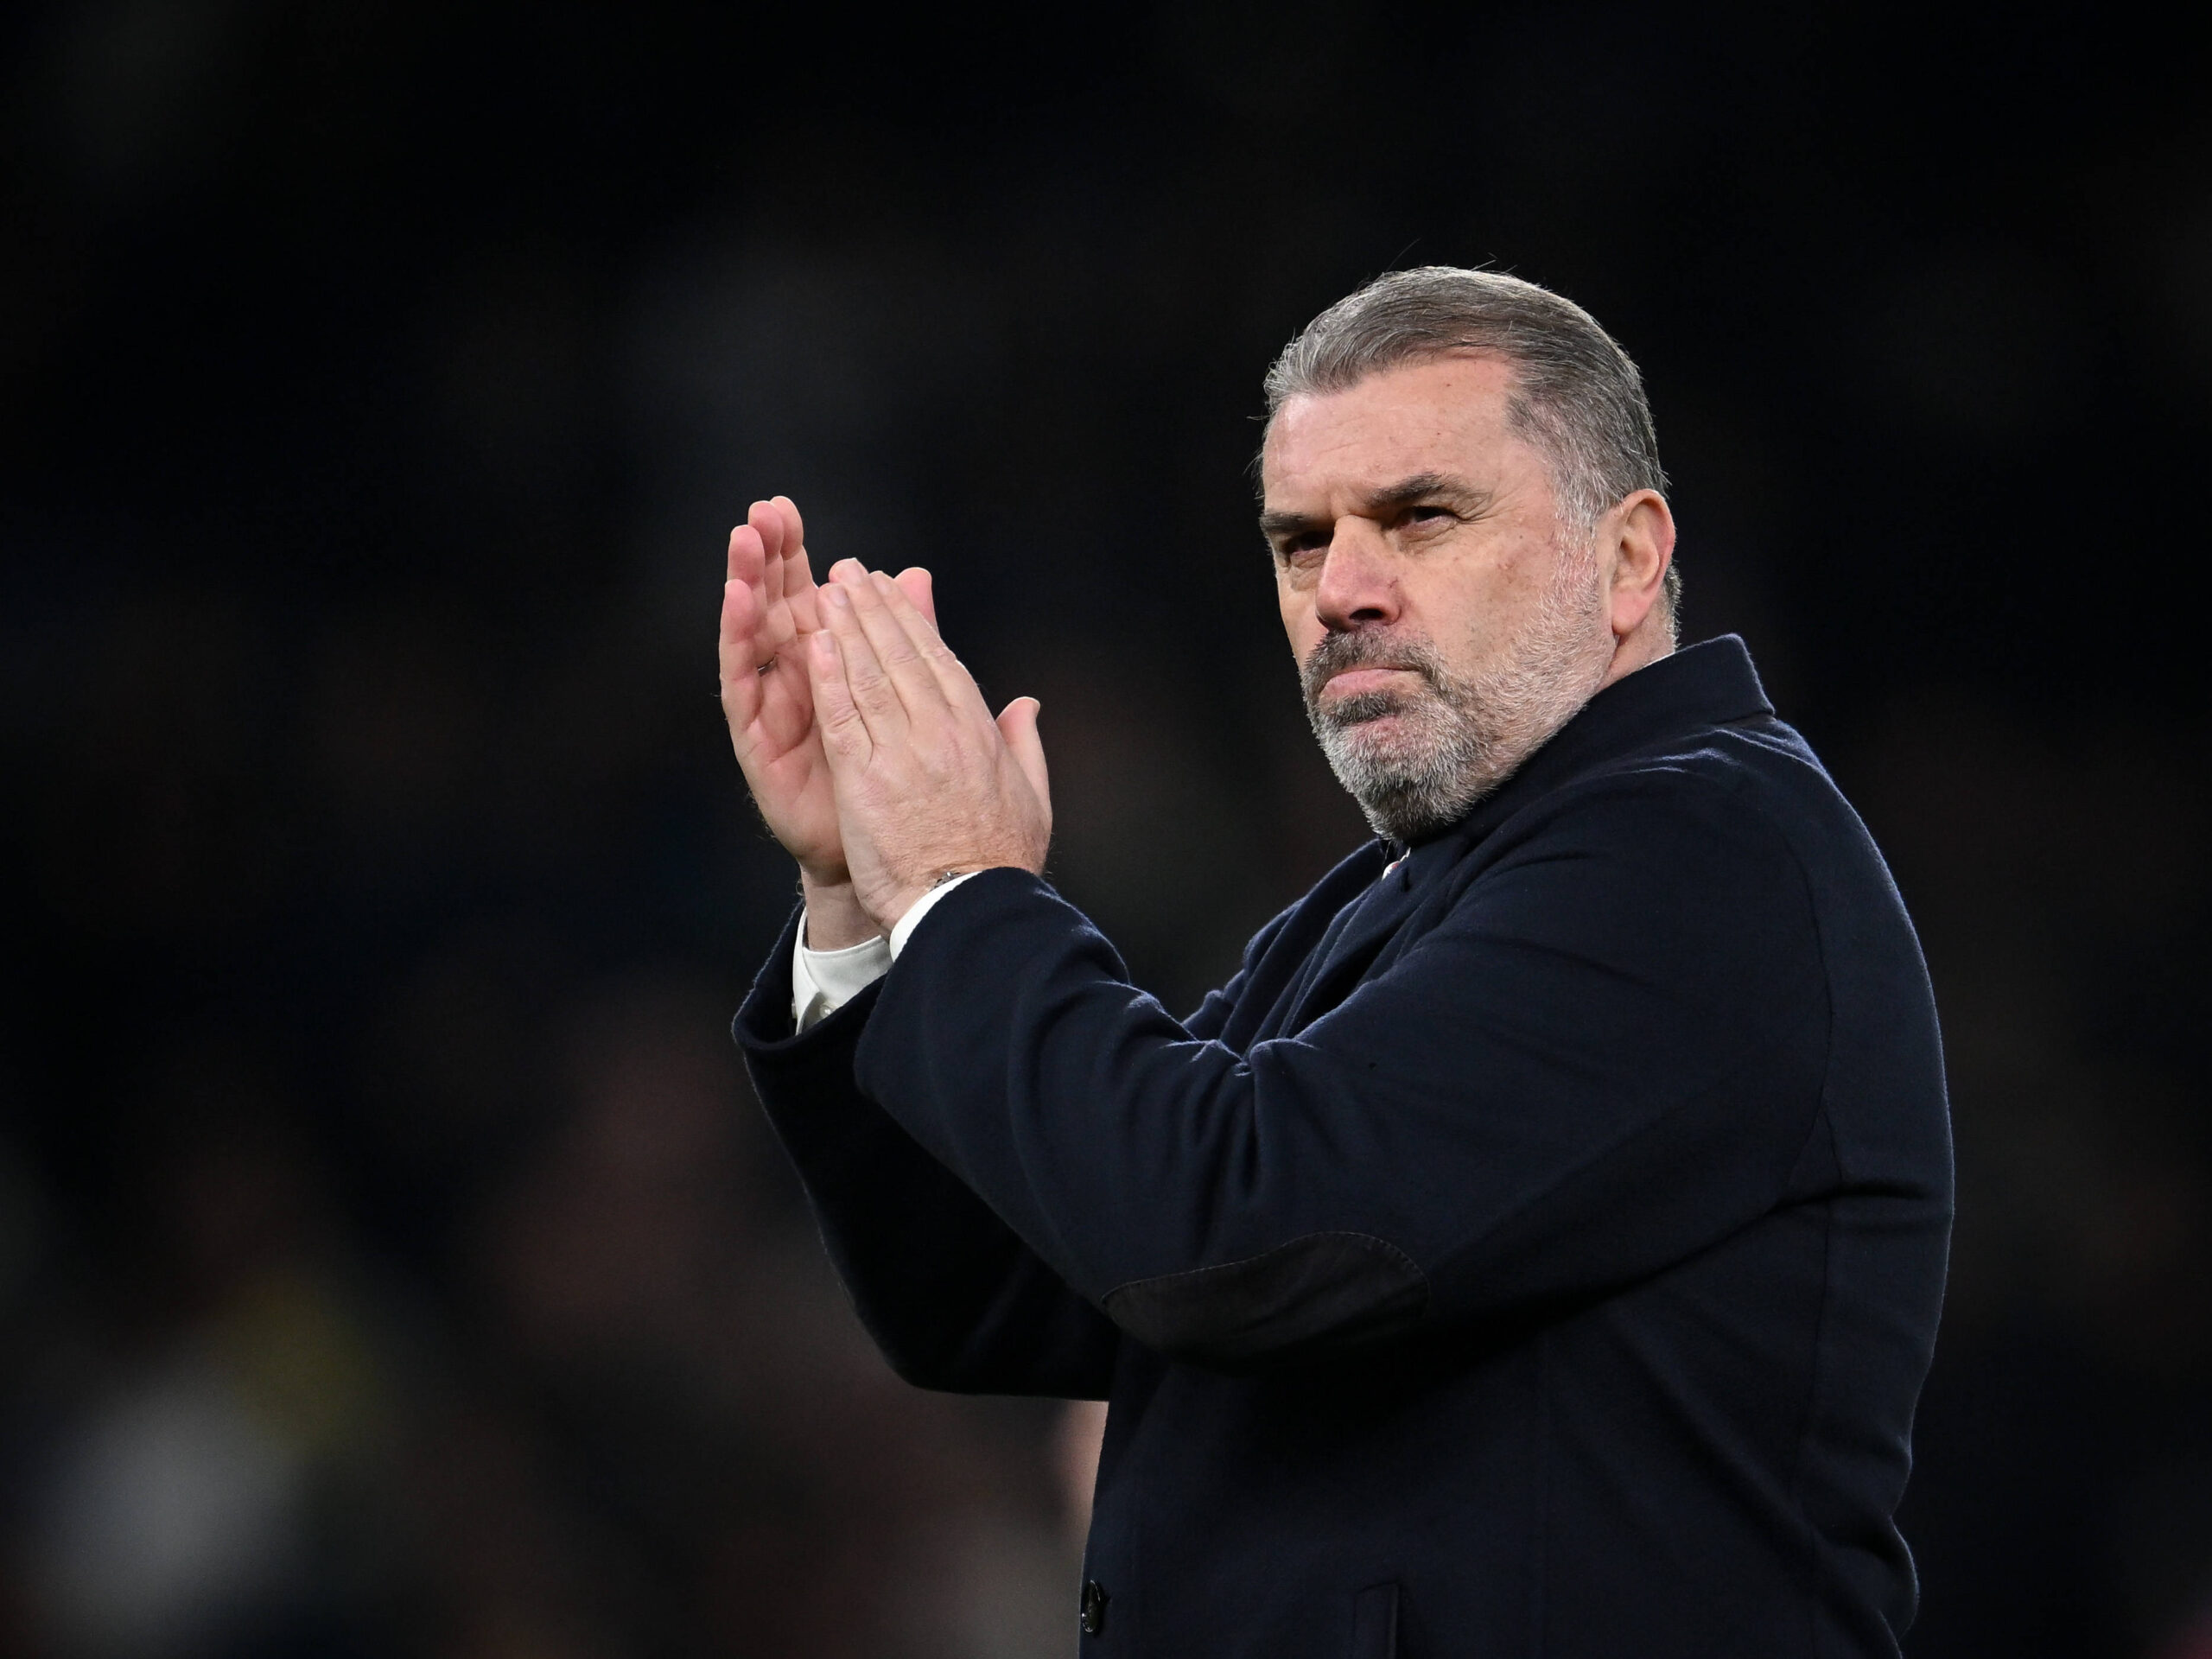 Ange Postecoglou applauding fans as he exits the pitch